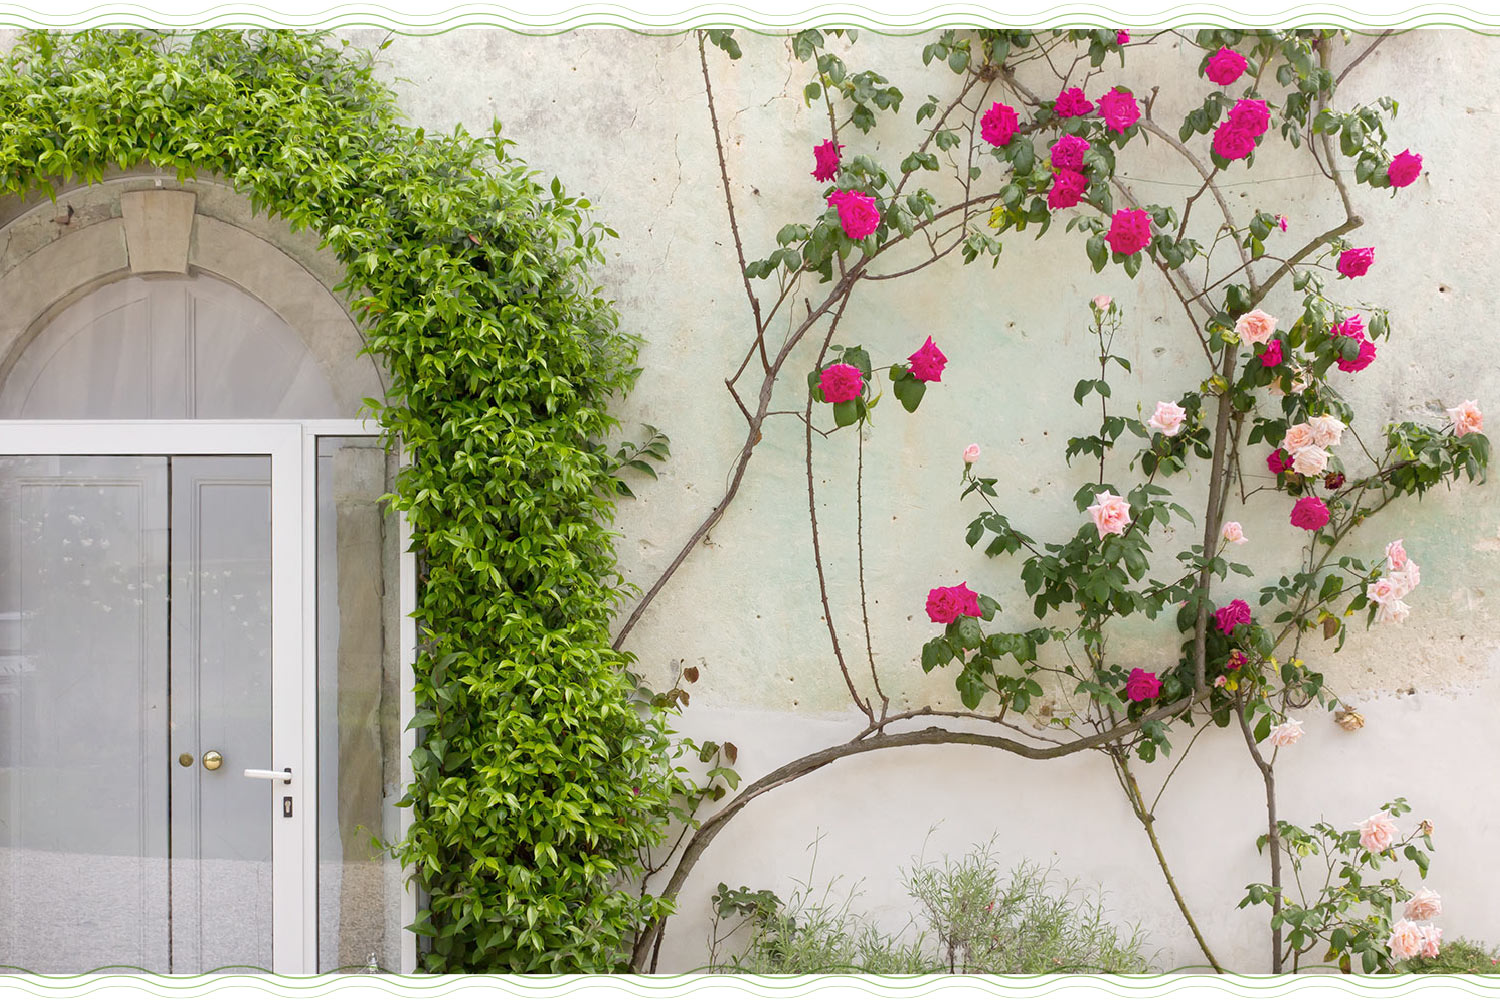 a building facade with roses growing up it and on the door